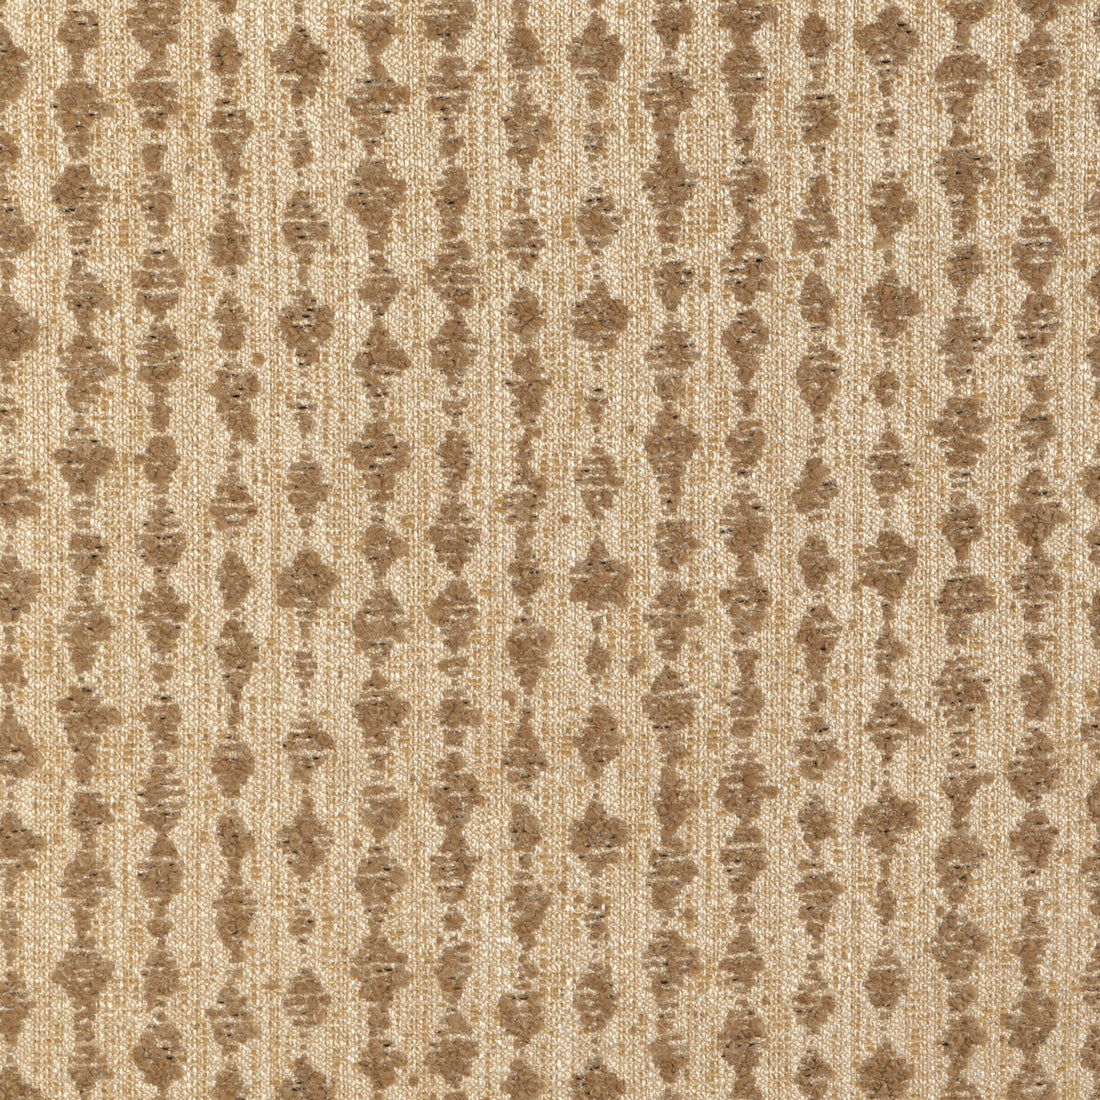 Serai fabric in toast color - pattern GWF-3795.6116.0 - by Lee Jofa Modern in the Kelly Wearstler VIII collection